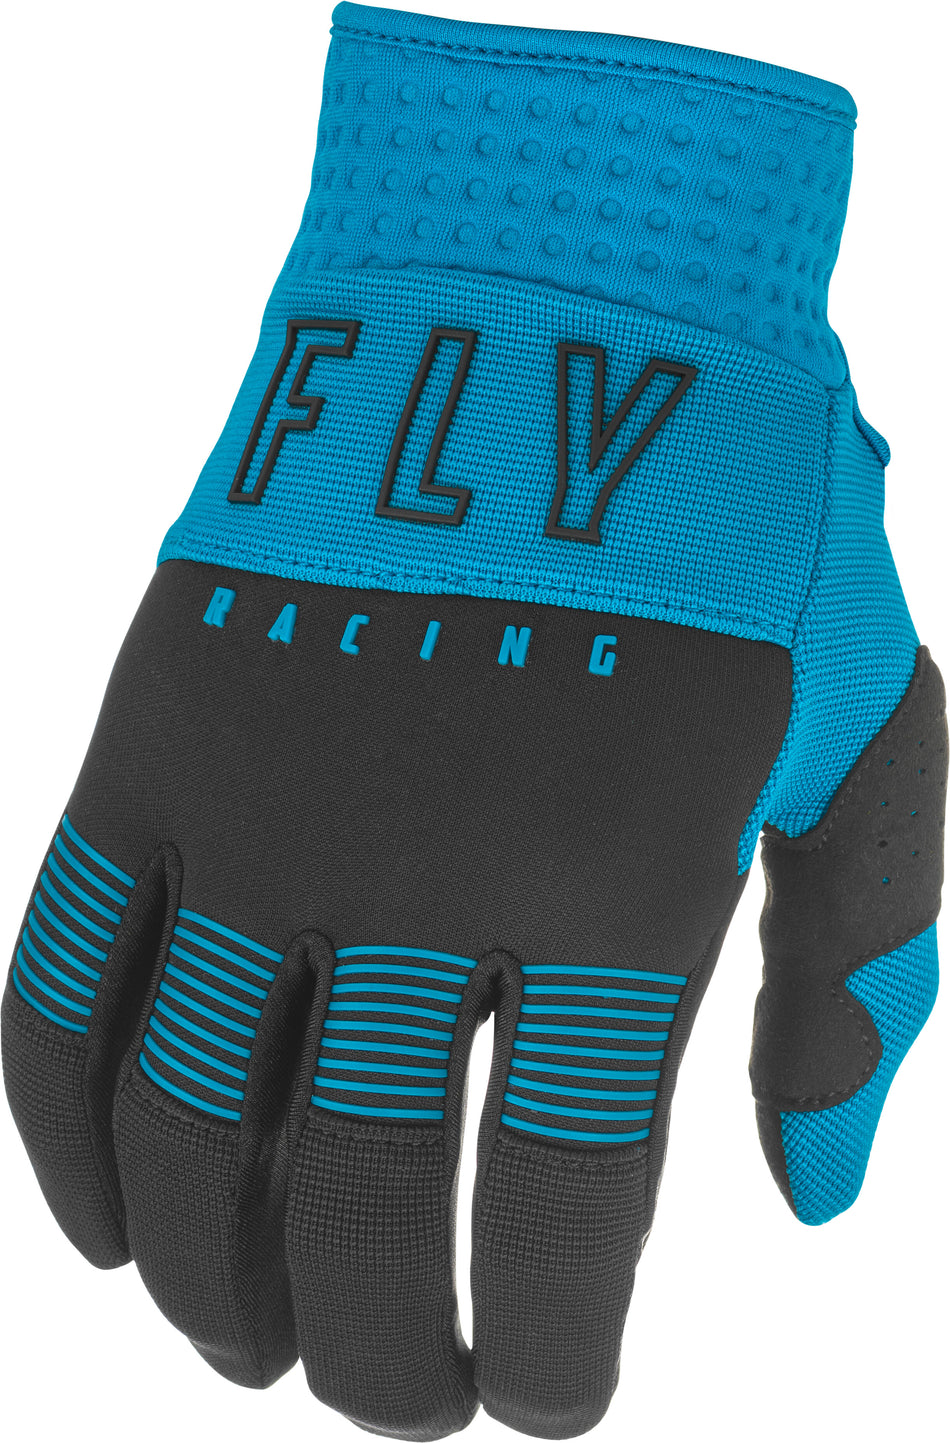 FLY RACING Youth F-16 Gloves Blue/Black Sz 02 374-91102